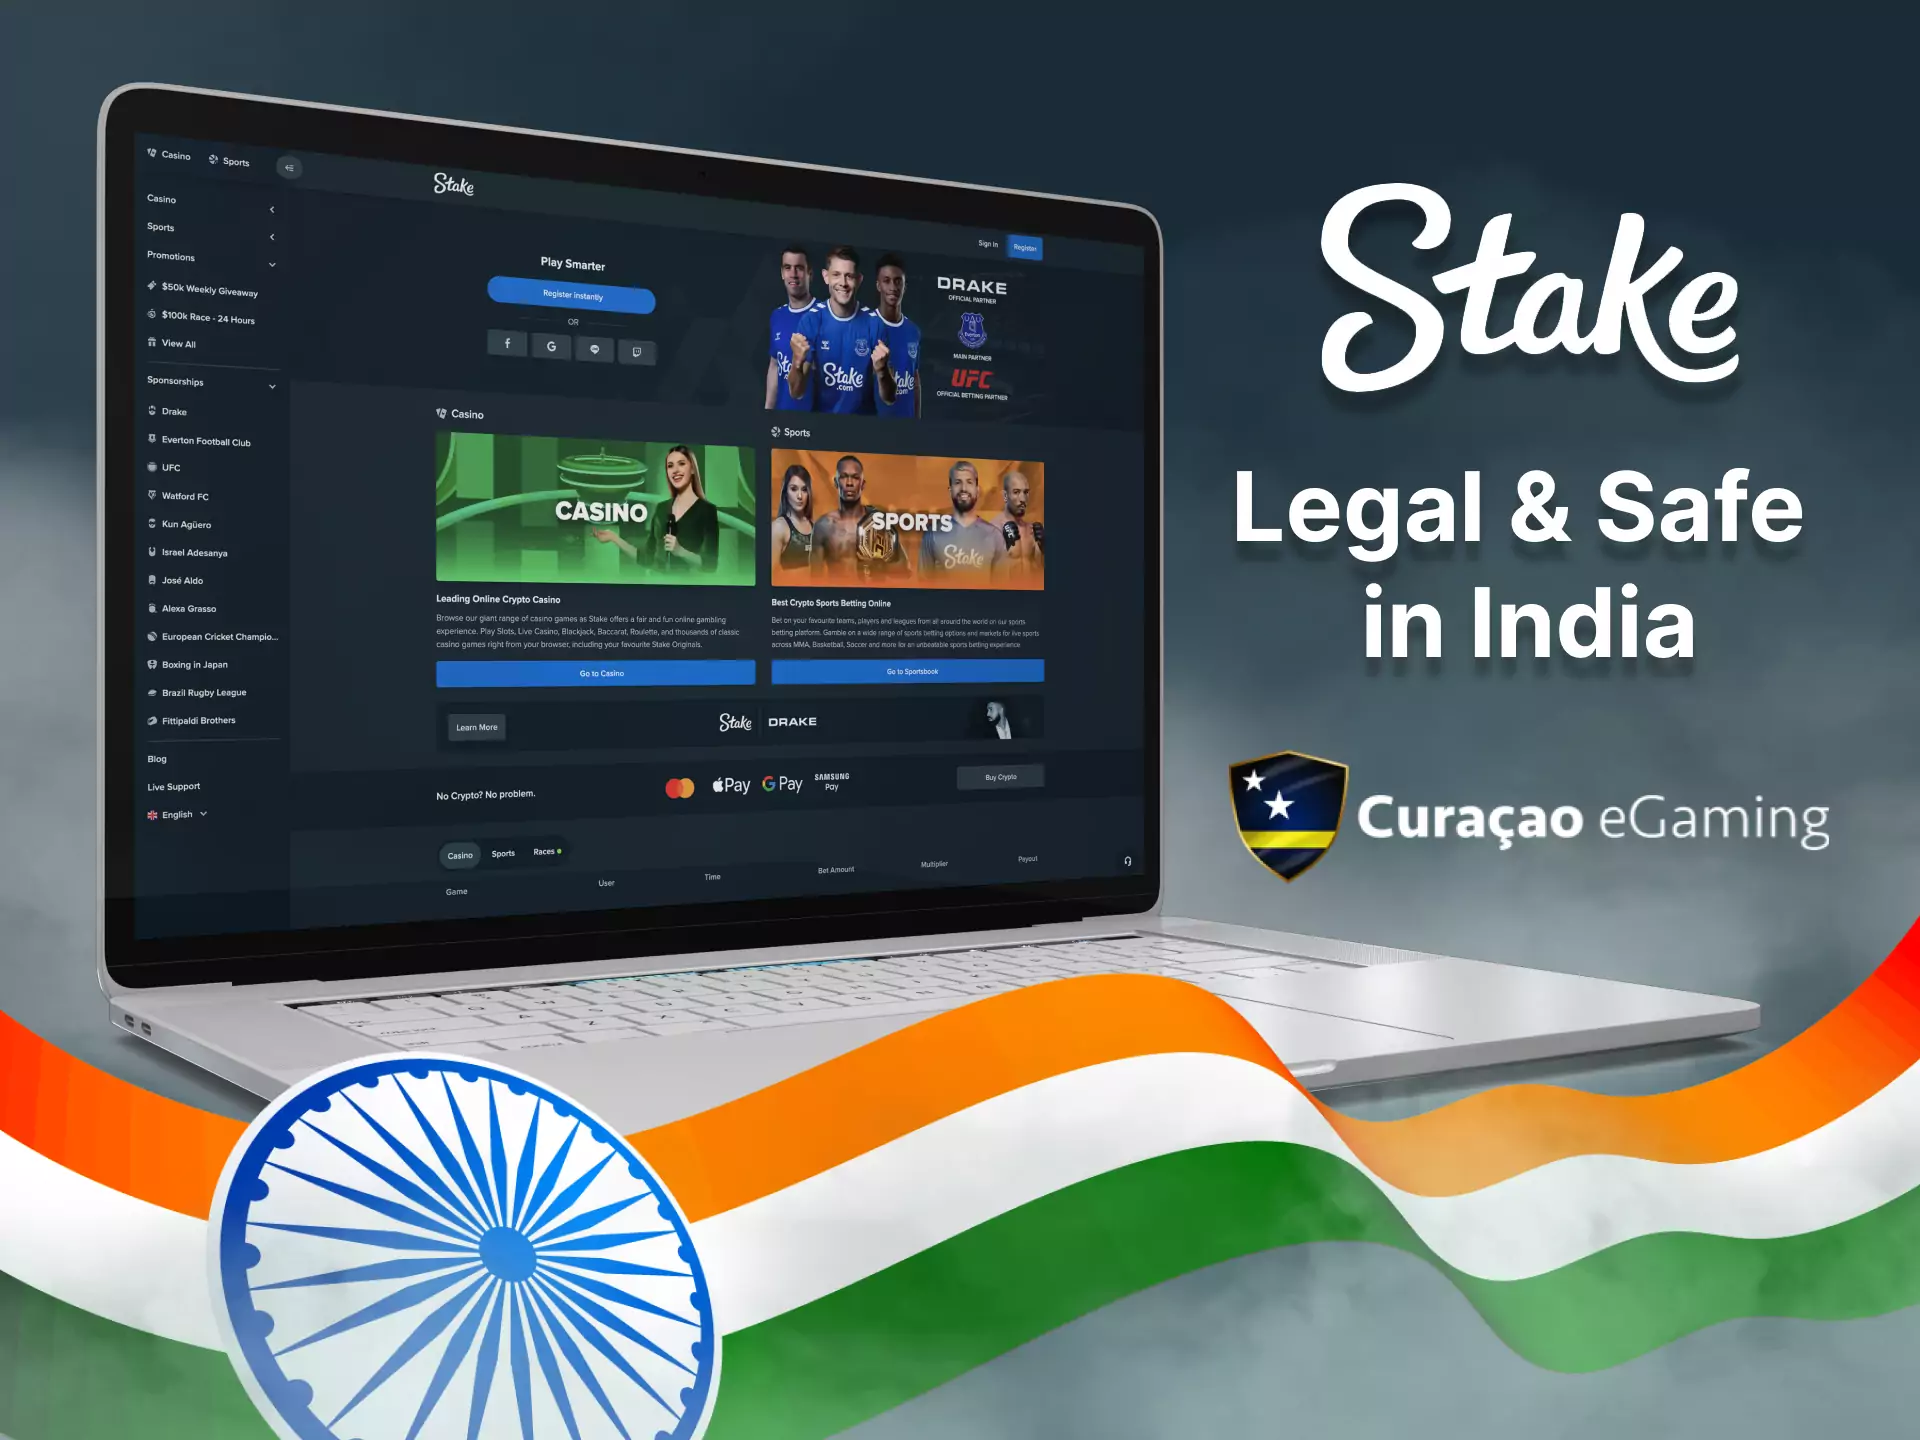 In India, Stake works legally thanking the Curacao Egaming license.